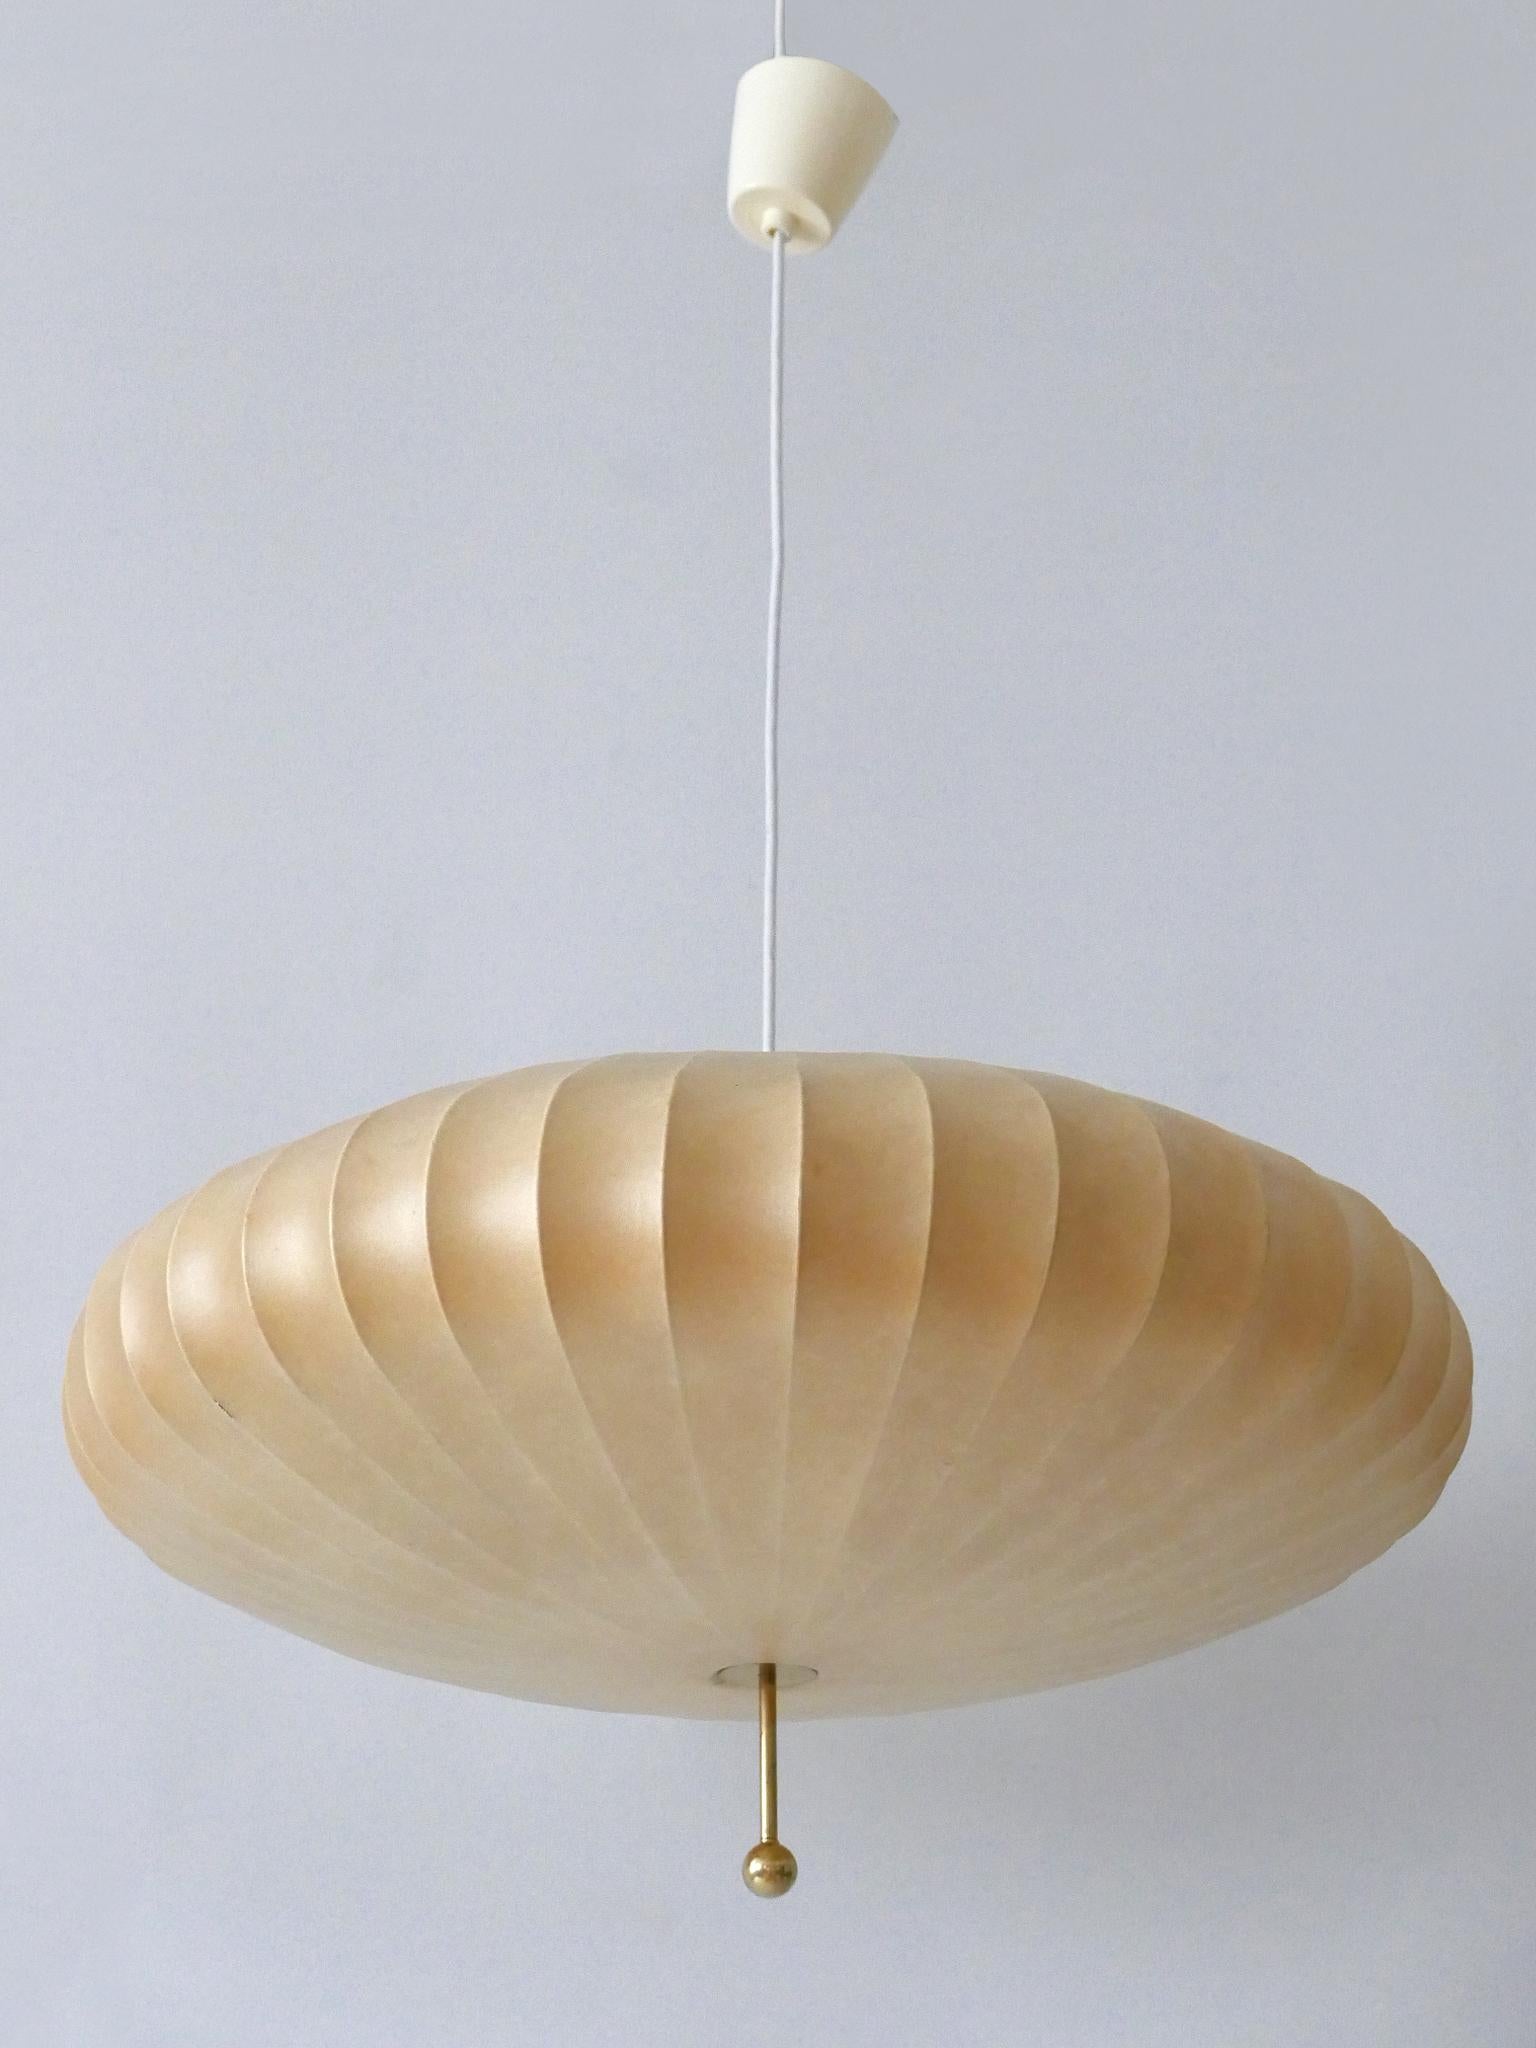 Large Mid-Century Modern Cocoon Pendant Lamp or Hanging Light by Goldkant 1960s 4